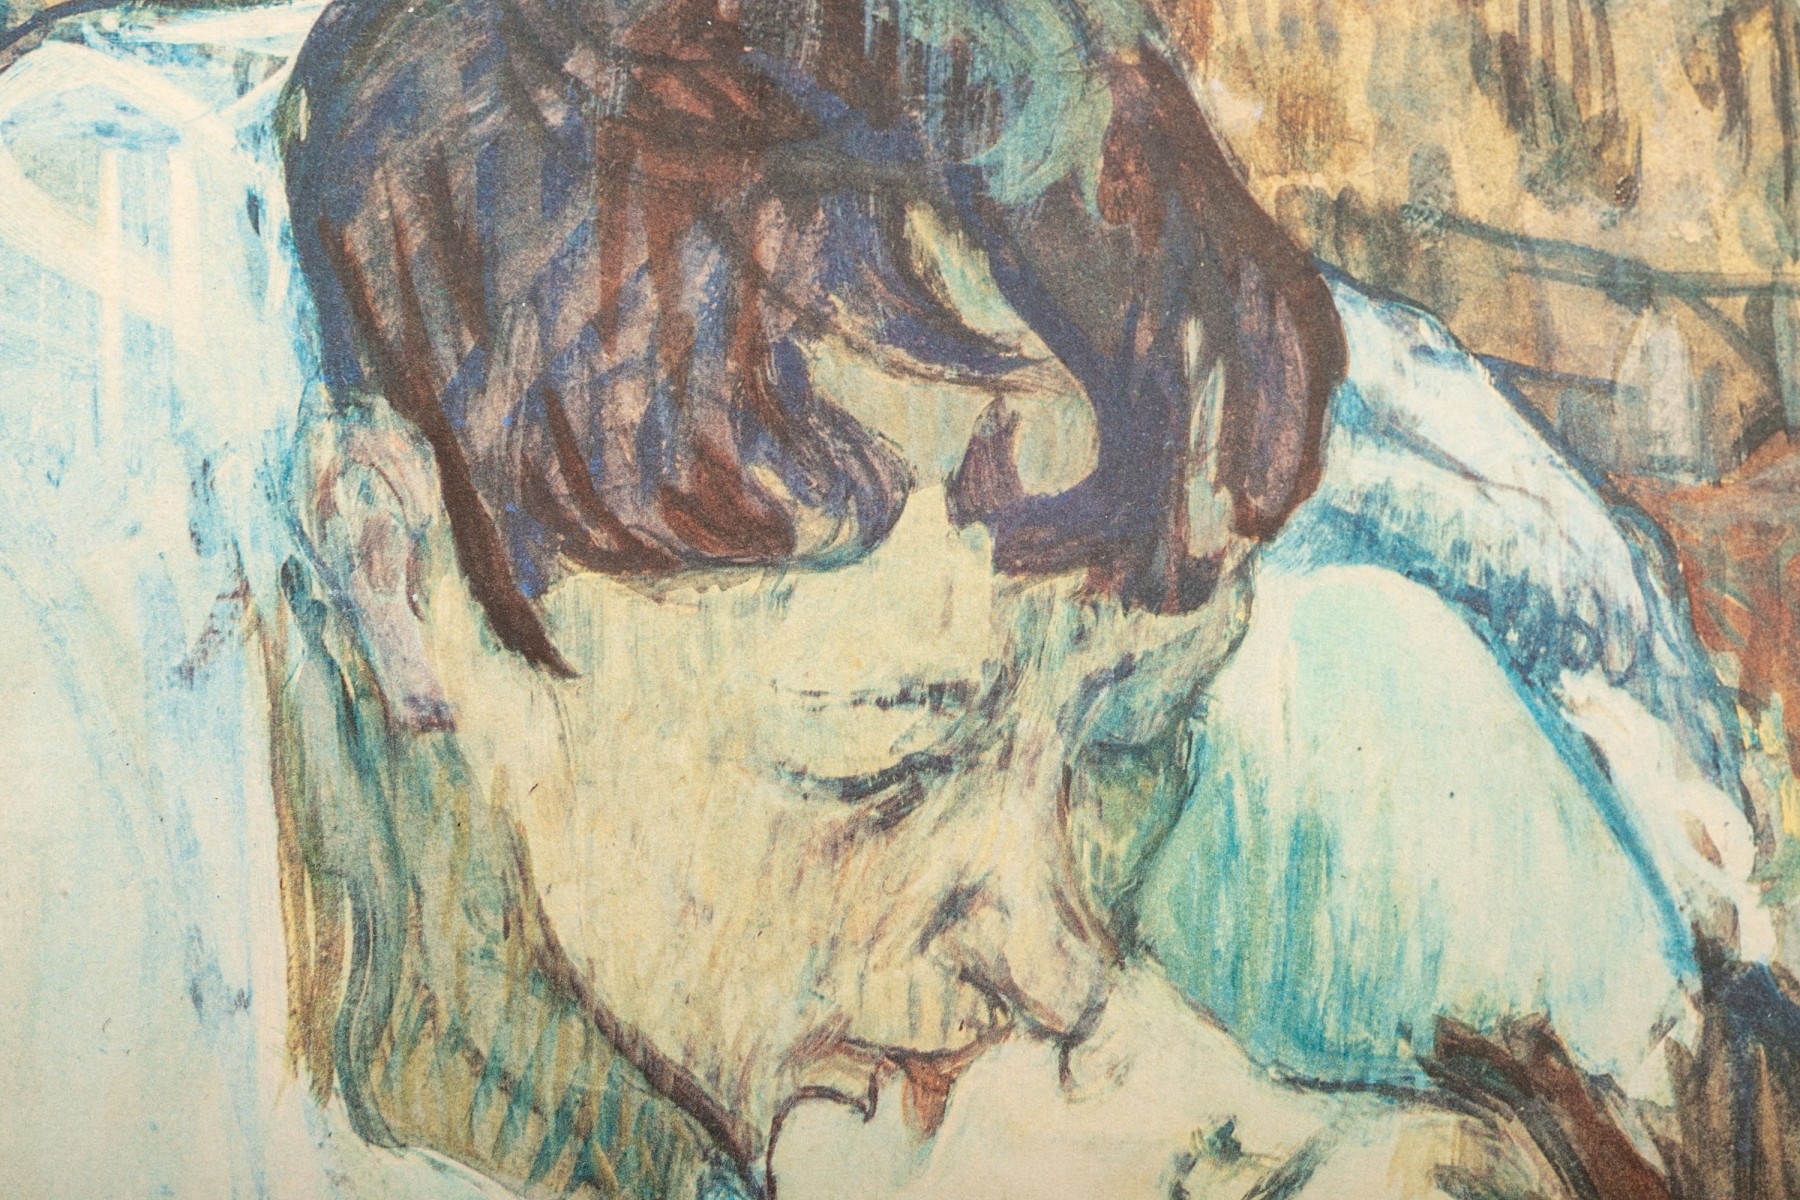 Artwork by Henri de Toulouse-Lautrec, In Bed The Kiss, Made of lithograph